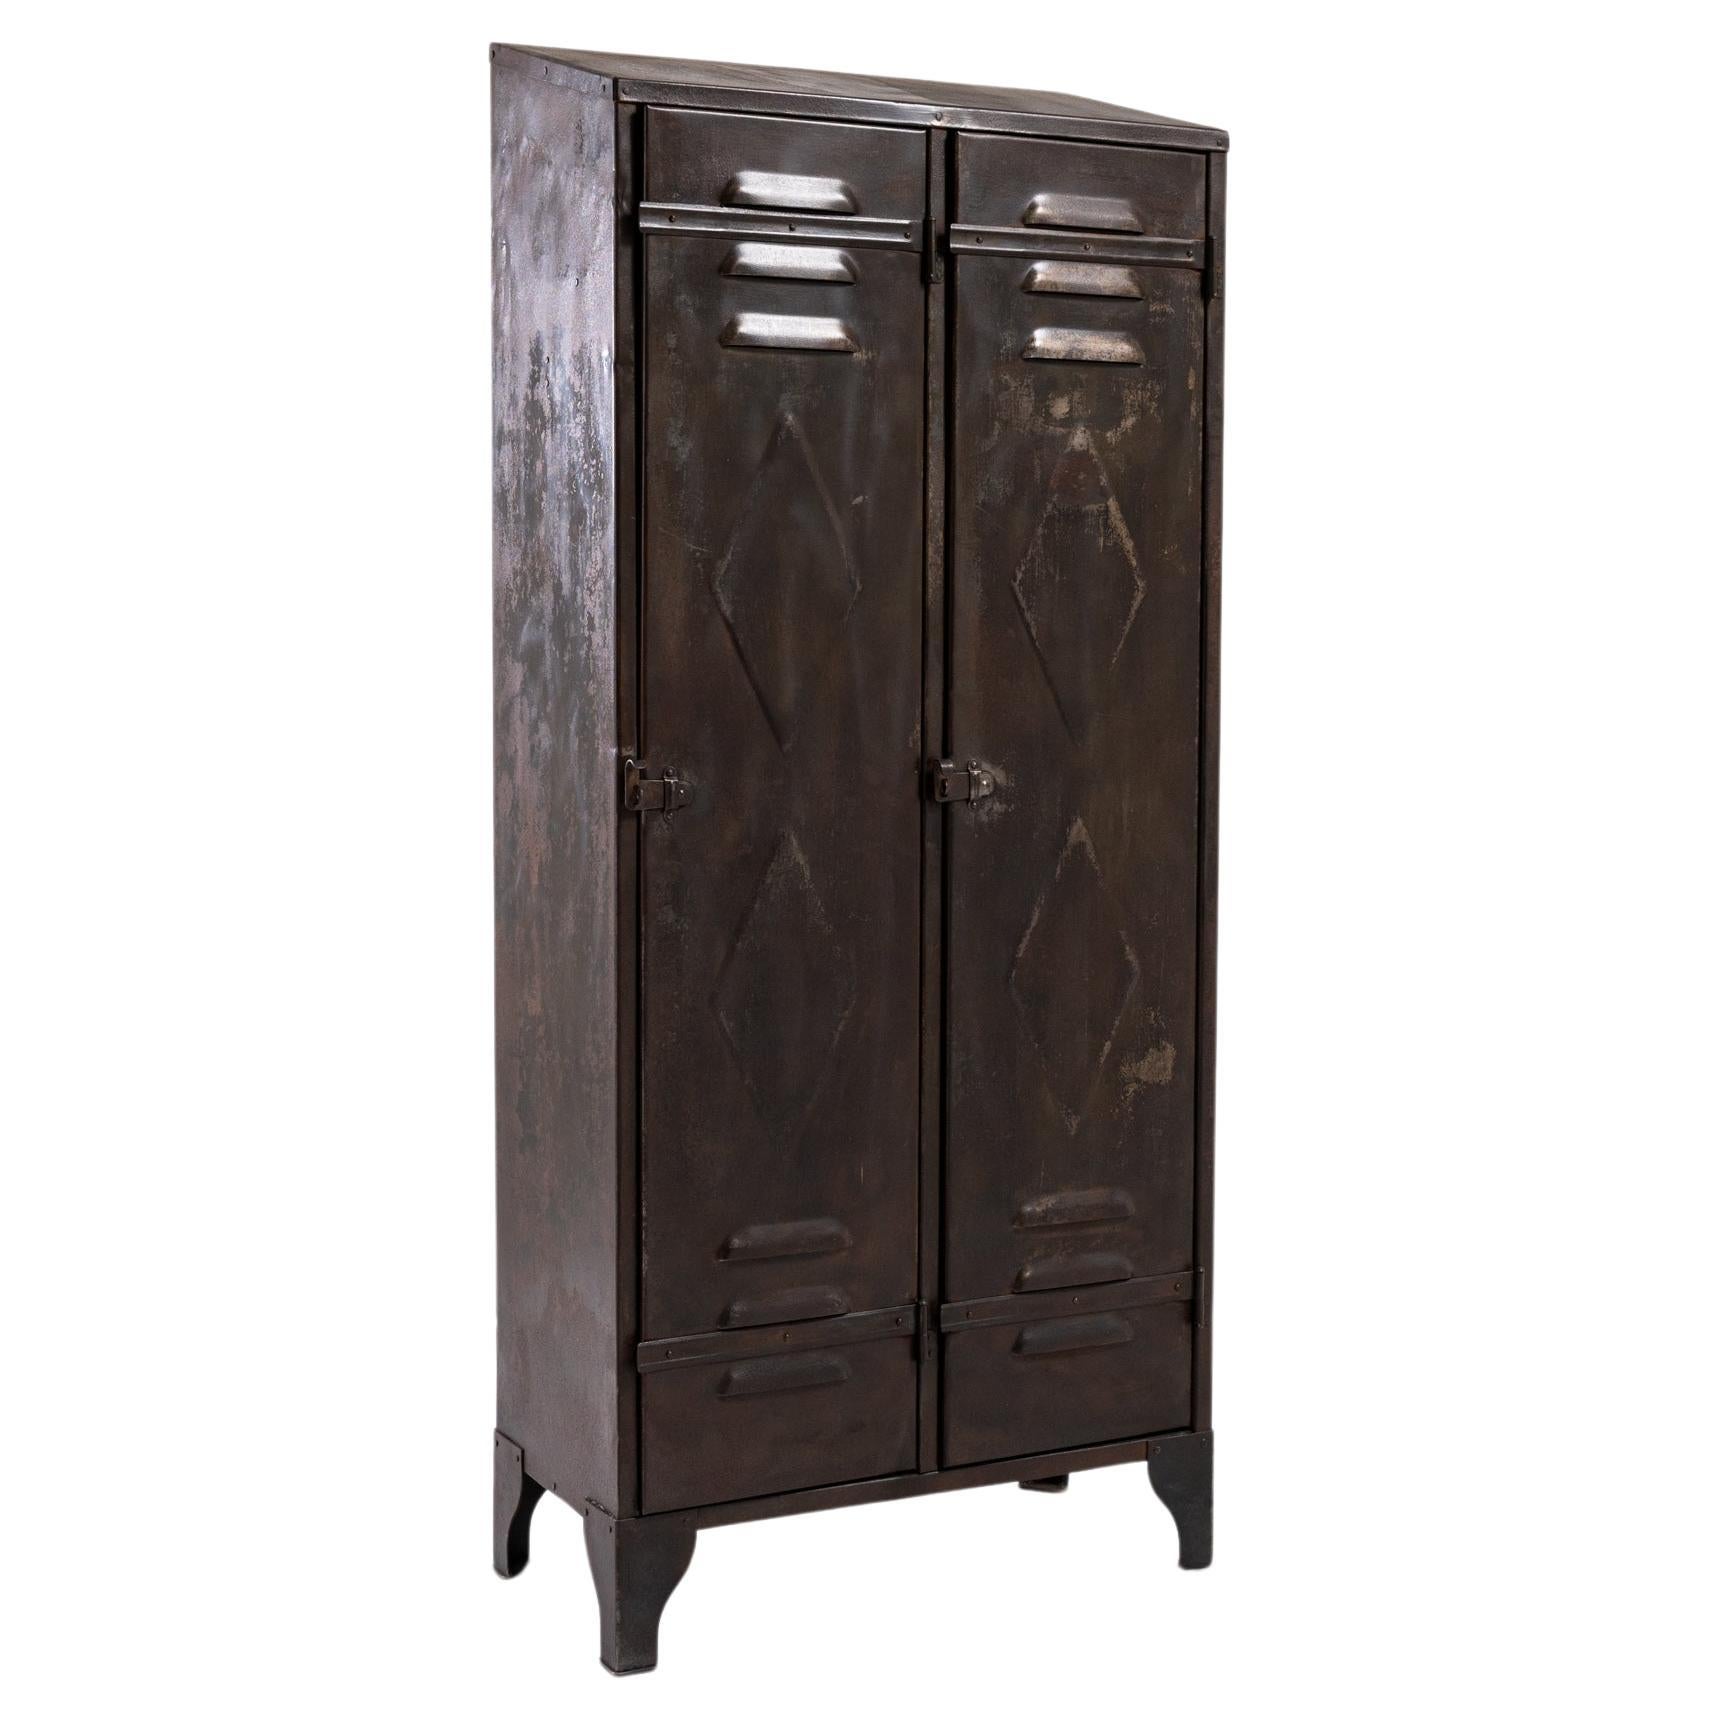 20th Century French Industrial Metal Locker For Sale